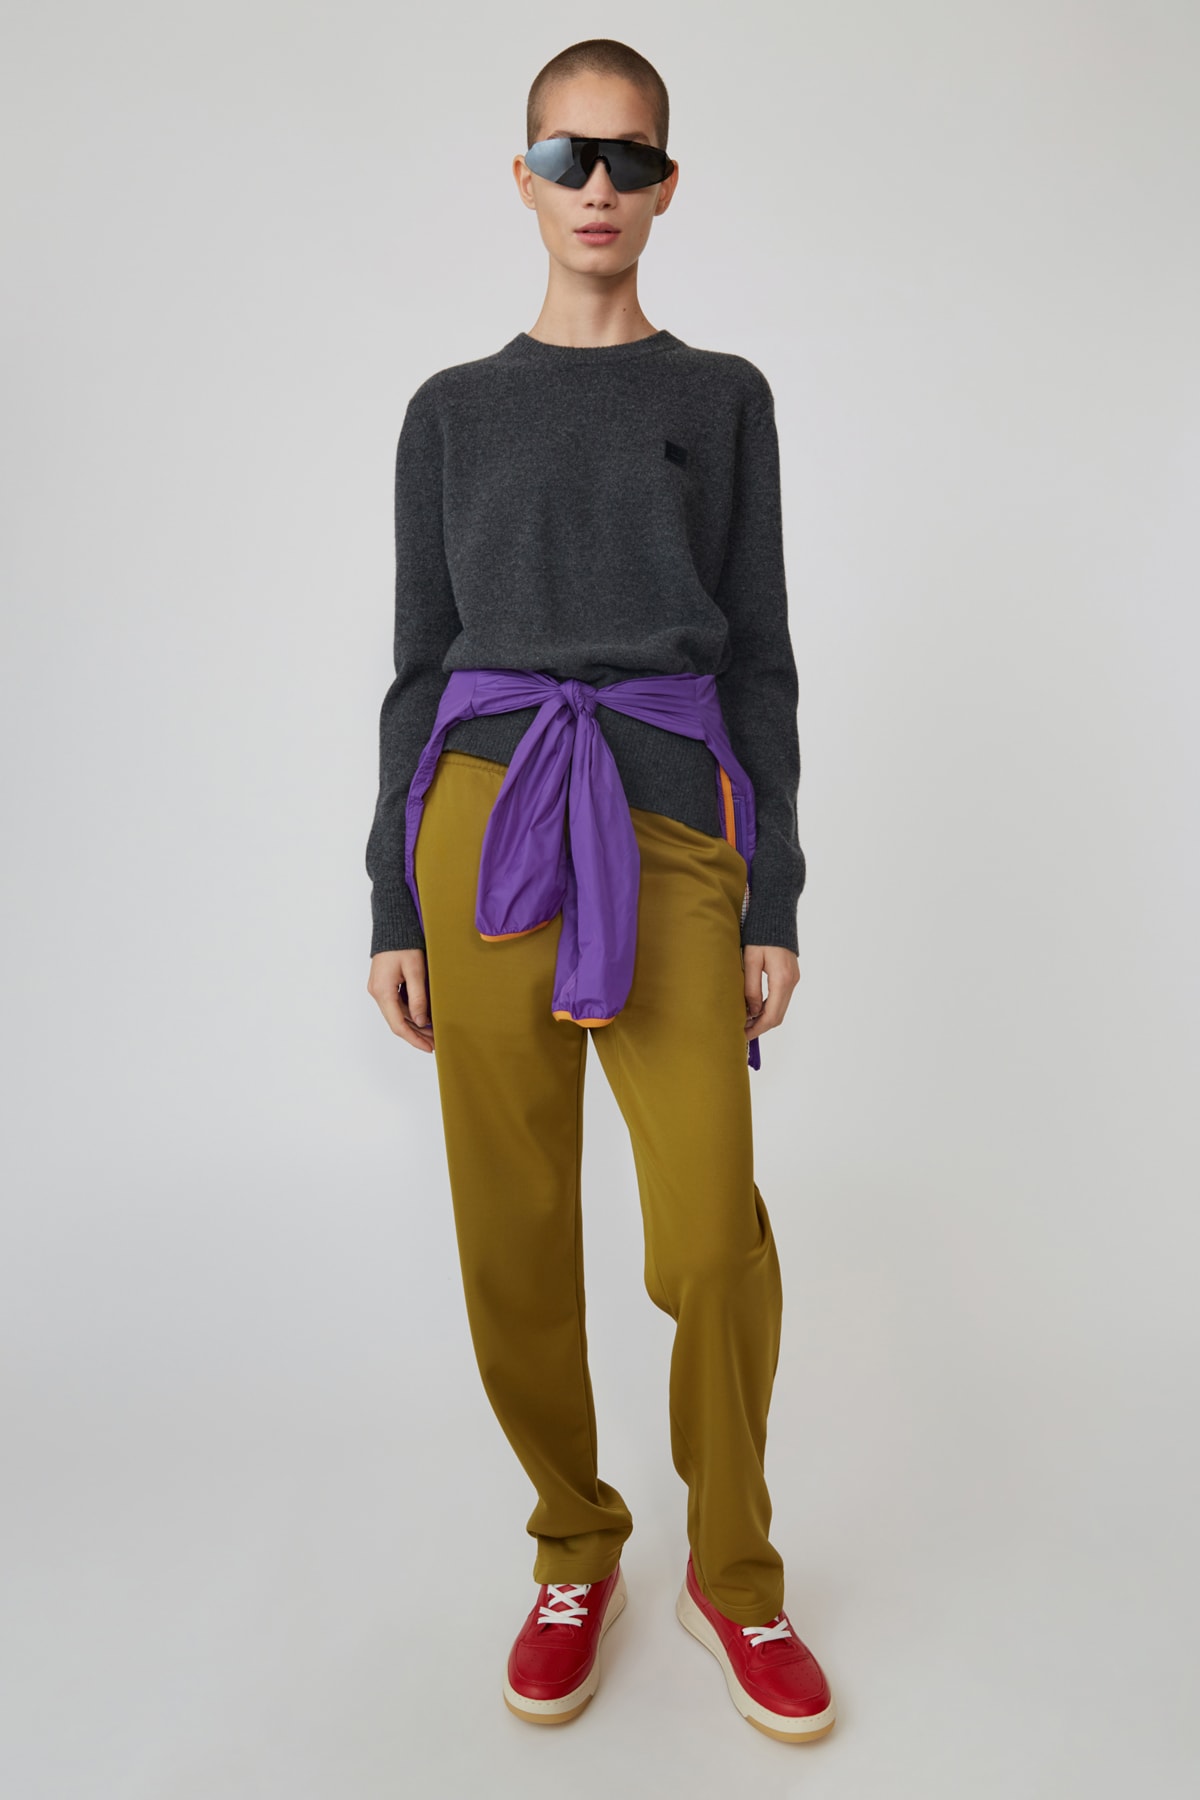 Acne Studios Spring/Summer 2019 Face Collection Long Sleeve Shirt Black Pants Brown